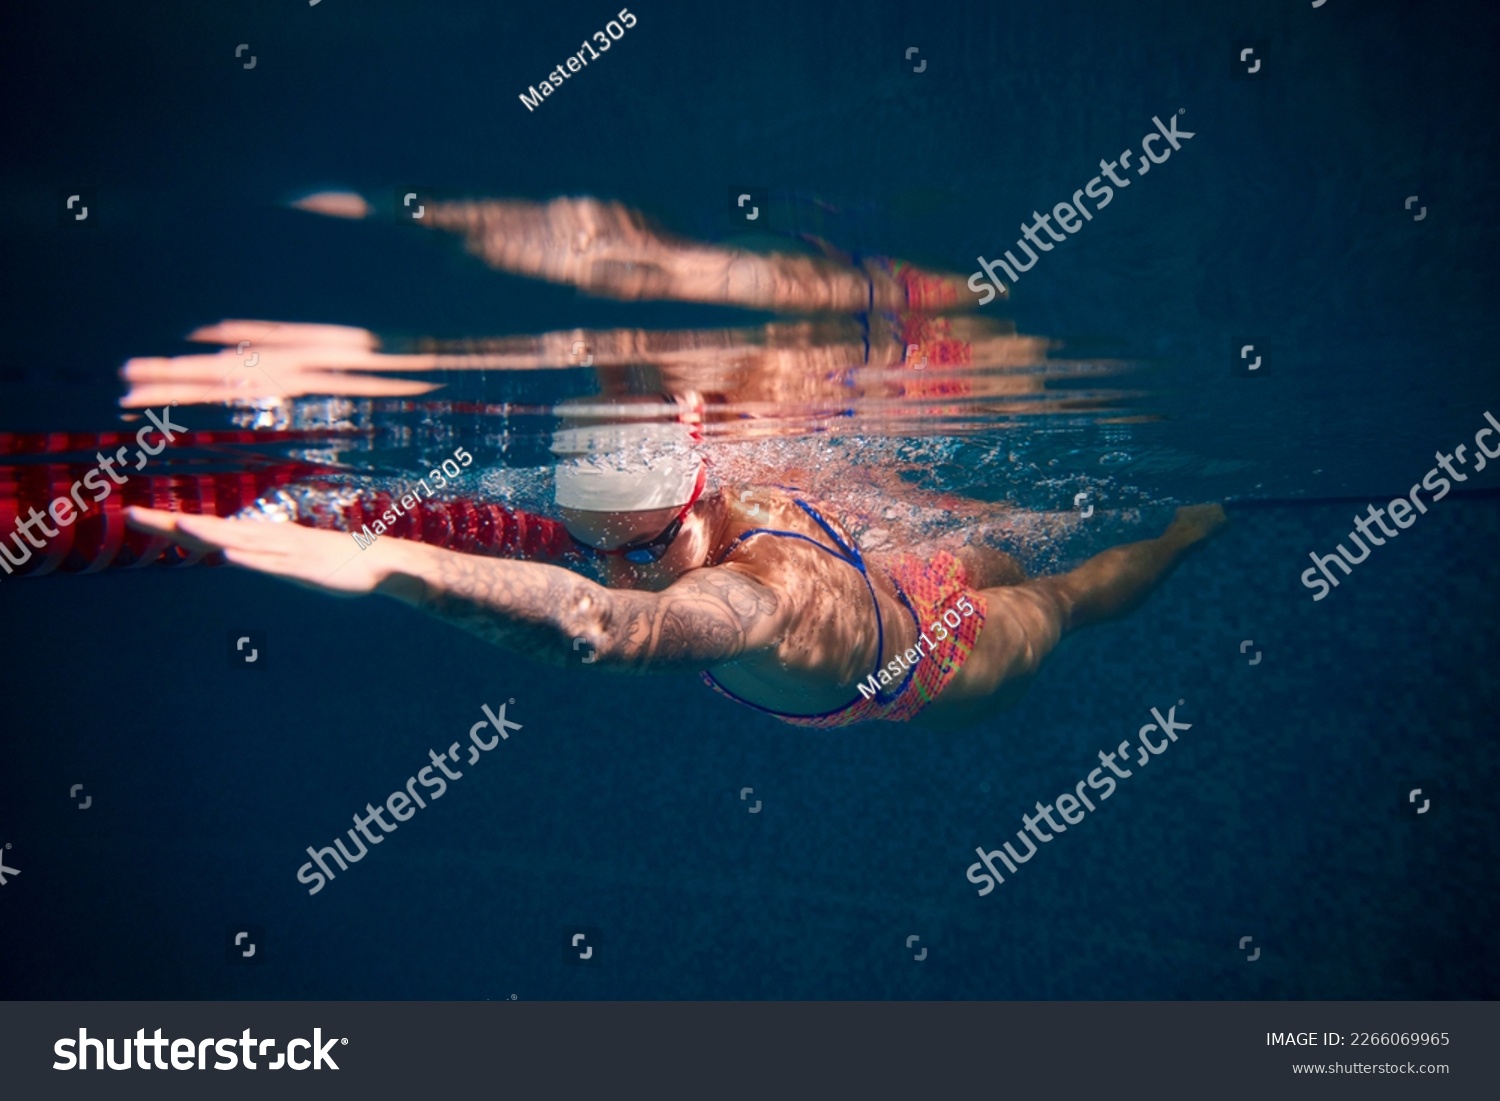 Growing speed and strength. Young woman, professional swimmer in goggles and cap training in swimming pool. Underwater view. Concept of sport, endurance, competition, energy, healthy lifestyle #2266069965